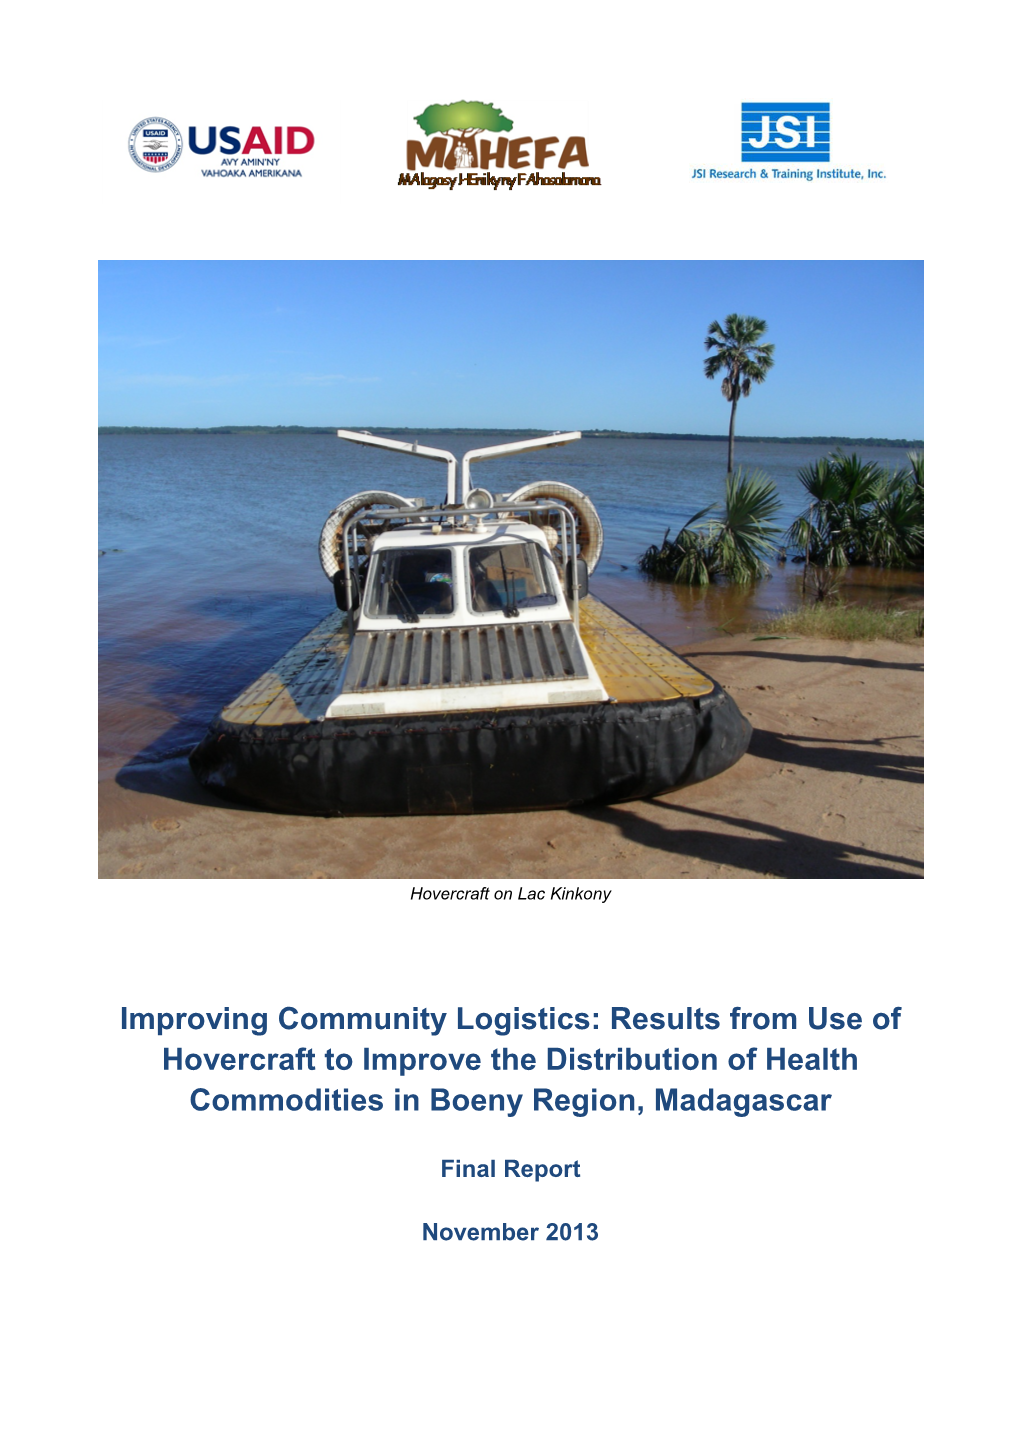 Improving Community Logistics: Results from Use of Hovercraft to Improve the Distribution of Health Commodities in Boeny Region, Madagascar